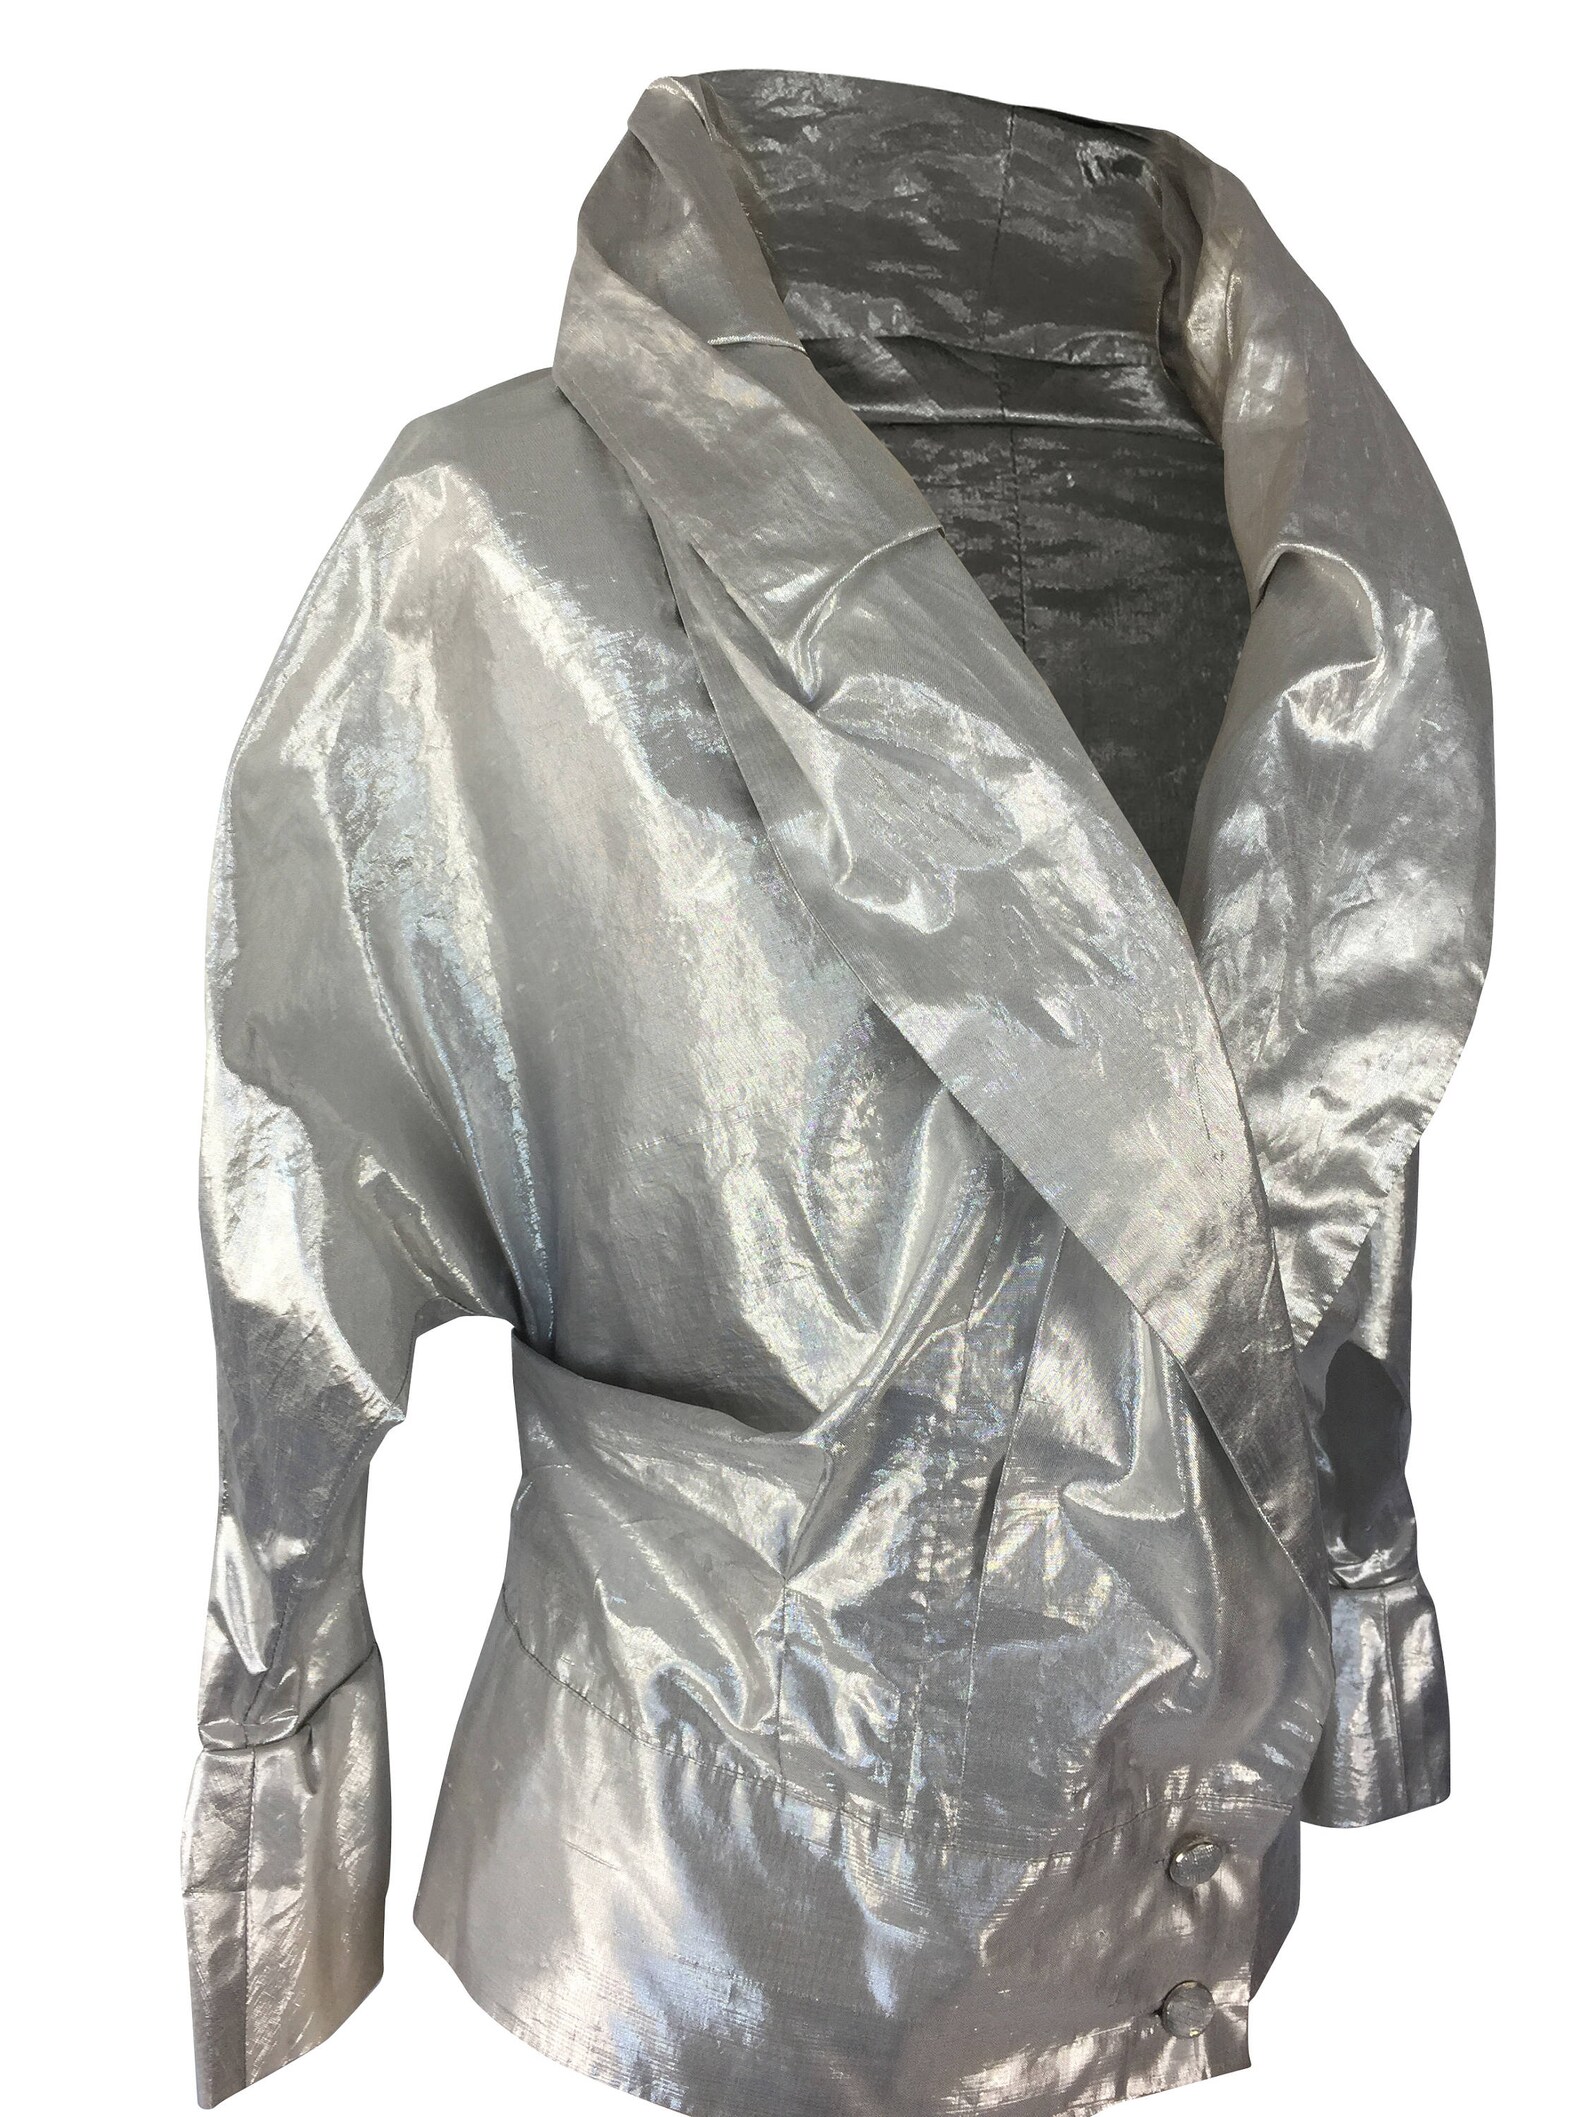 Metallic Silk JACKET For Evening Parties / Dinner Party Wear / | Etsy